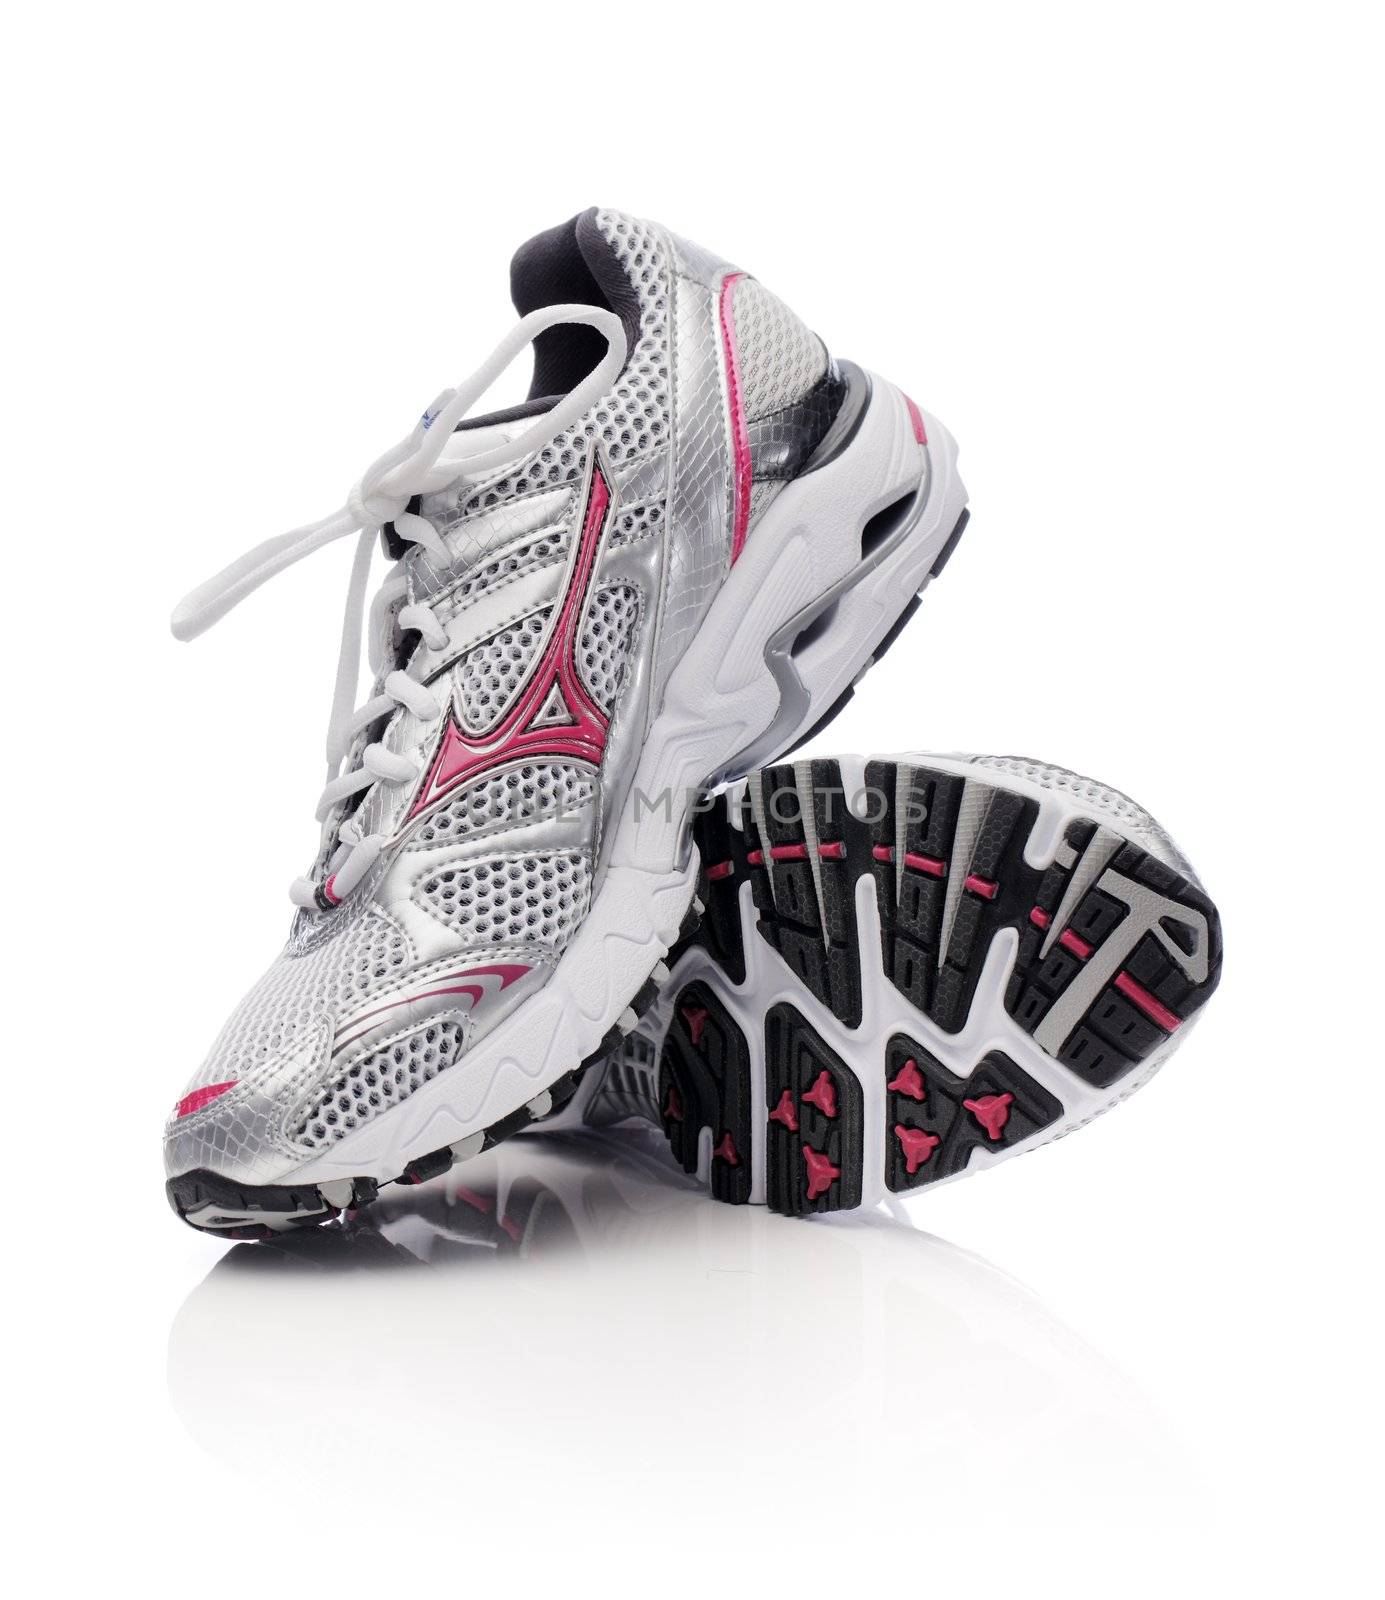 Finland - April 18, 2011: New women's Mizuno brand athletic shoes designed for running. 